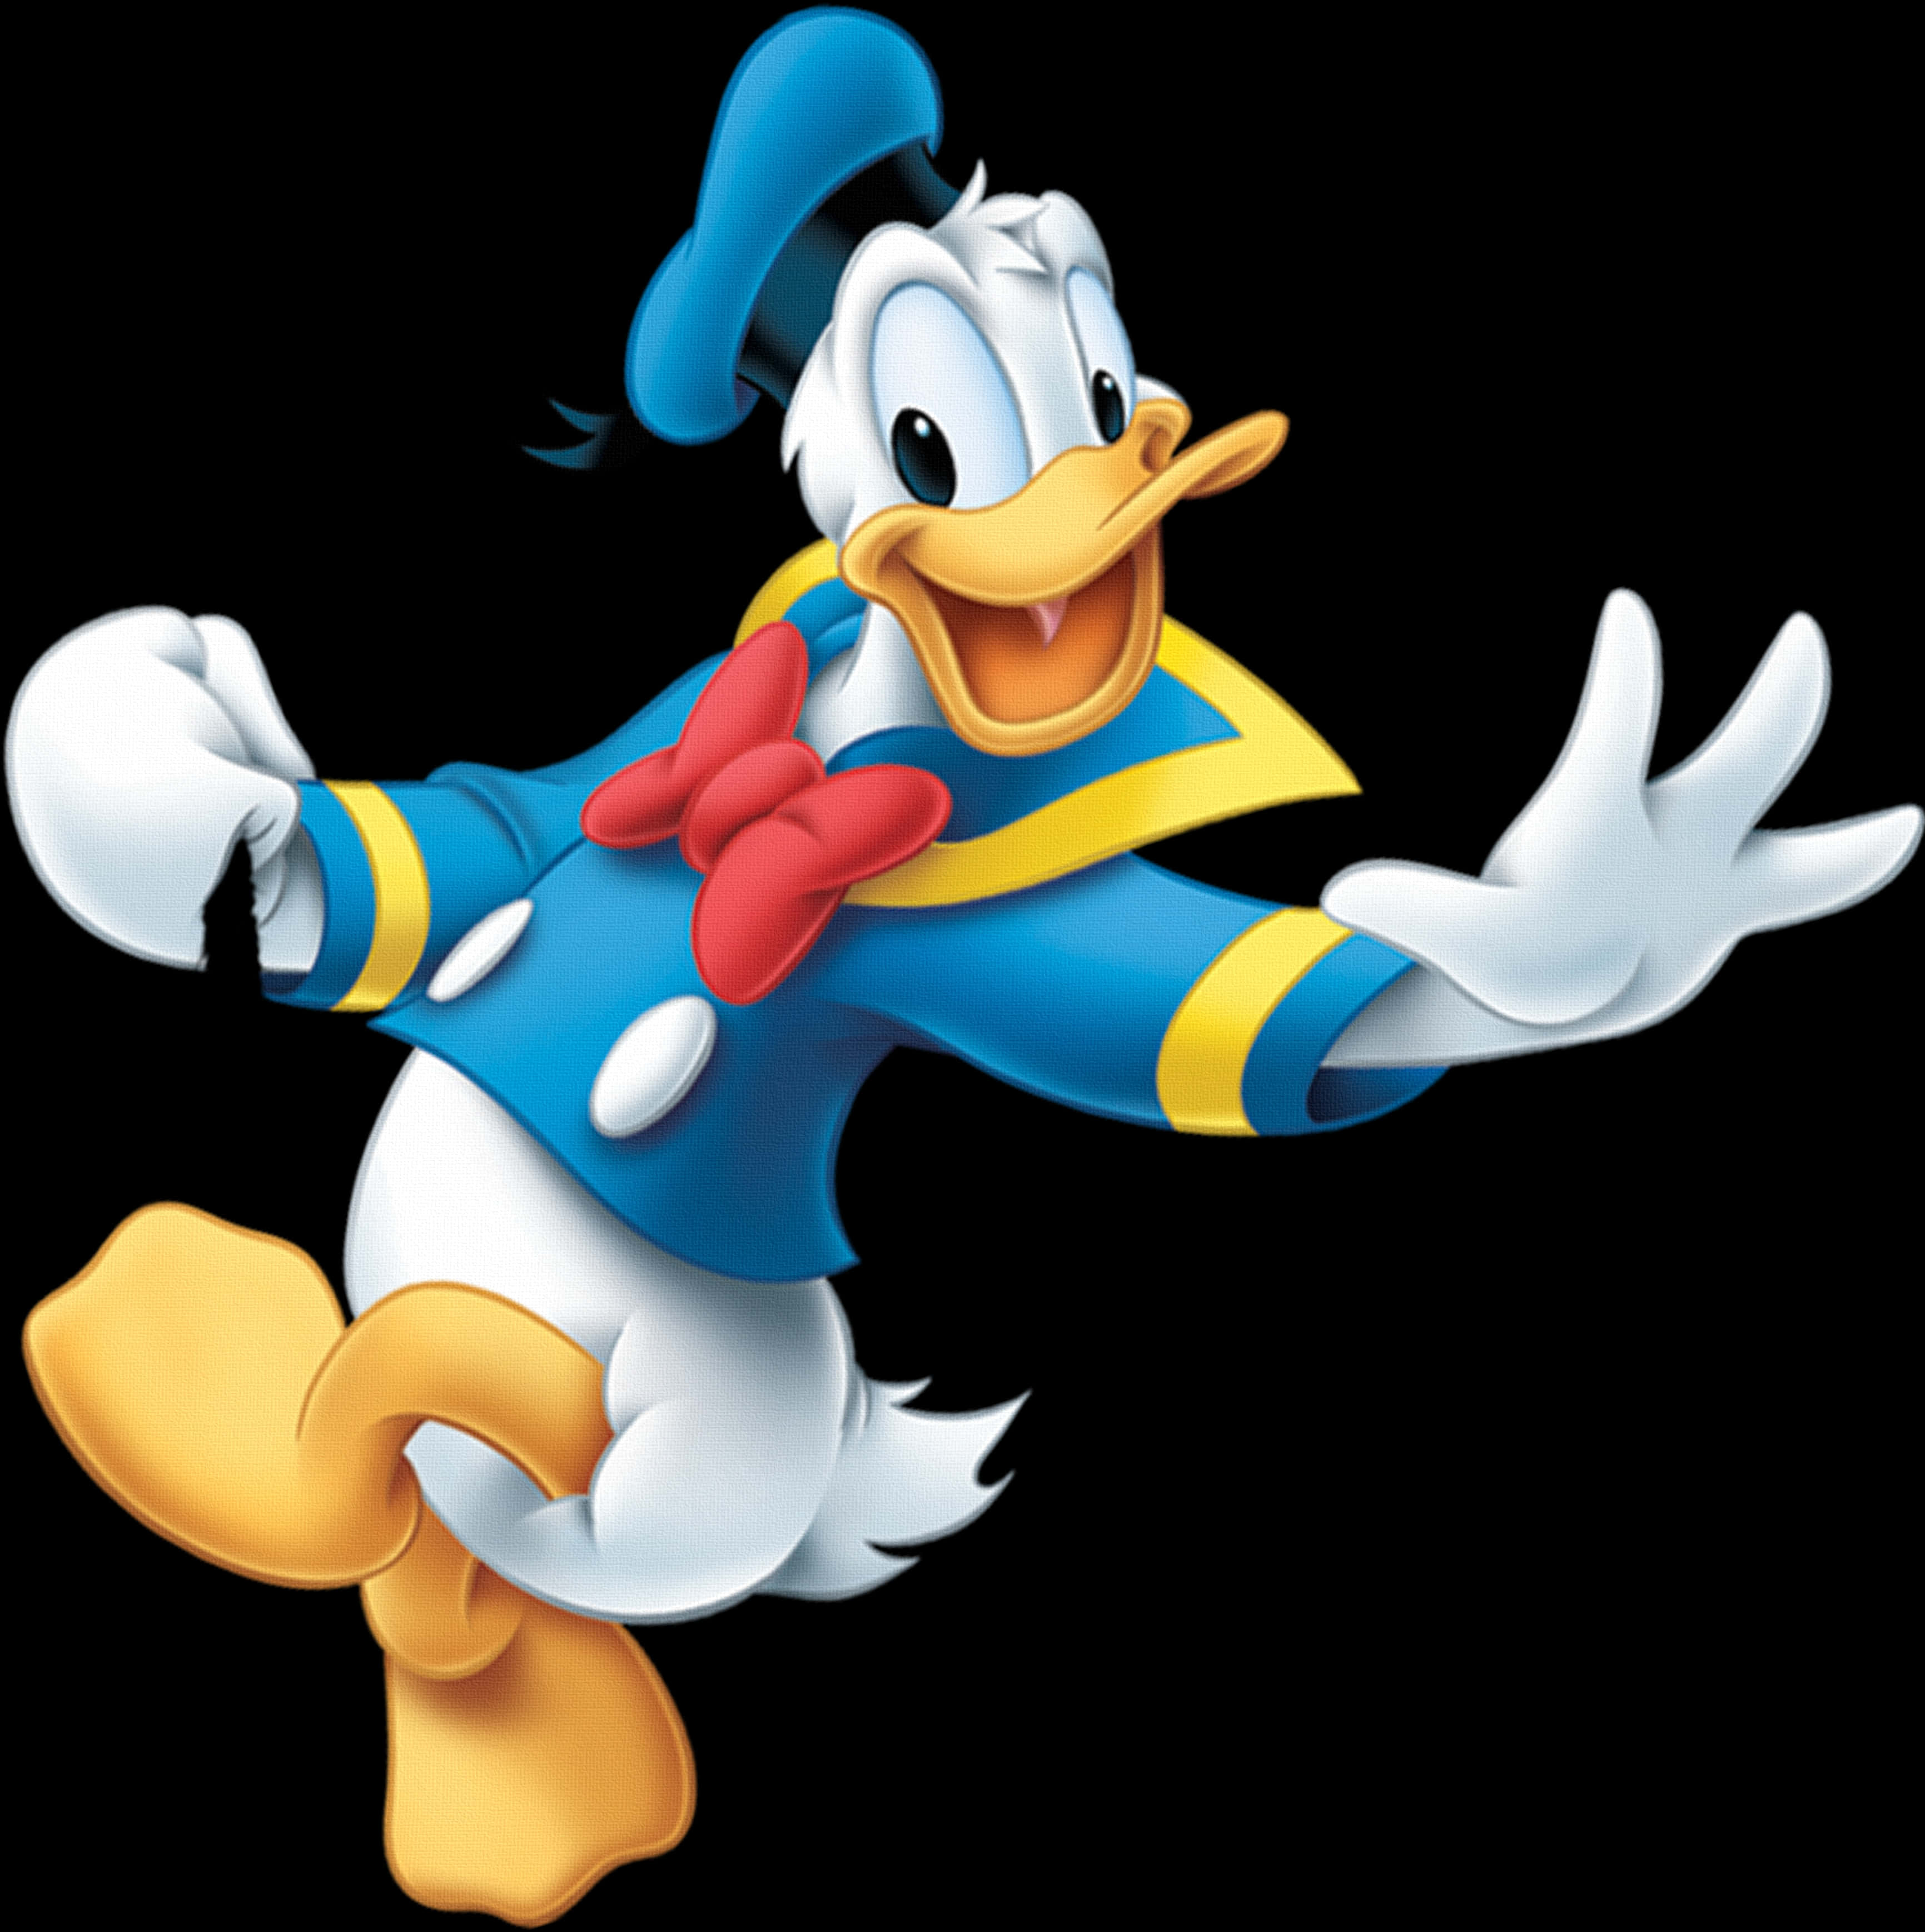 Download Animated Duck Character Greeting | Wallpapers.com